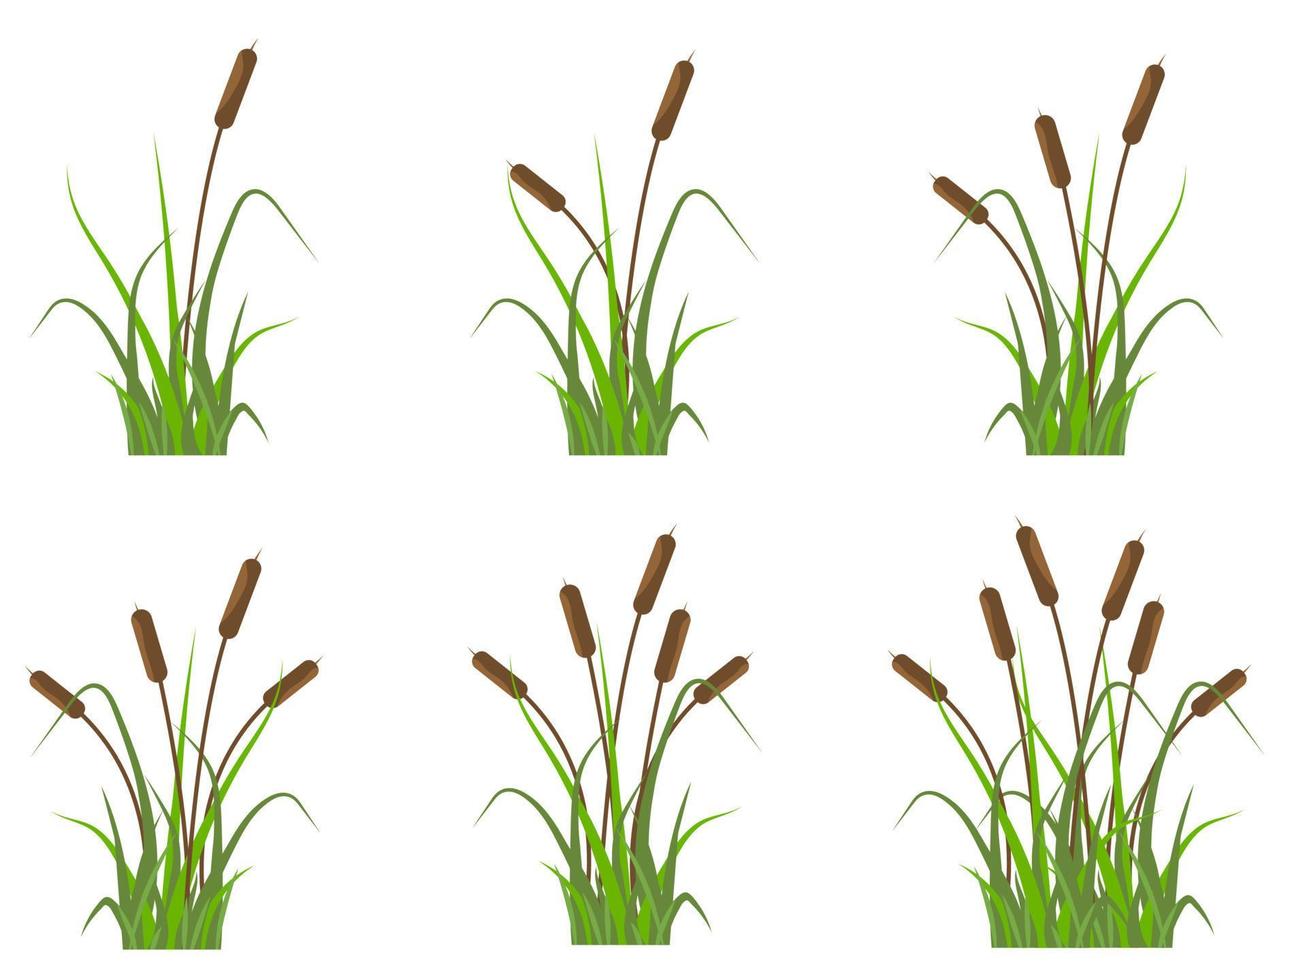 Reeds icons set, plants on the river in the green grass. Simple flat vector illustration isolated on white background